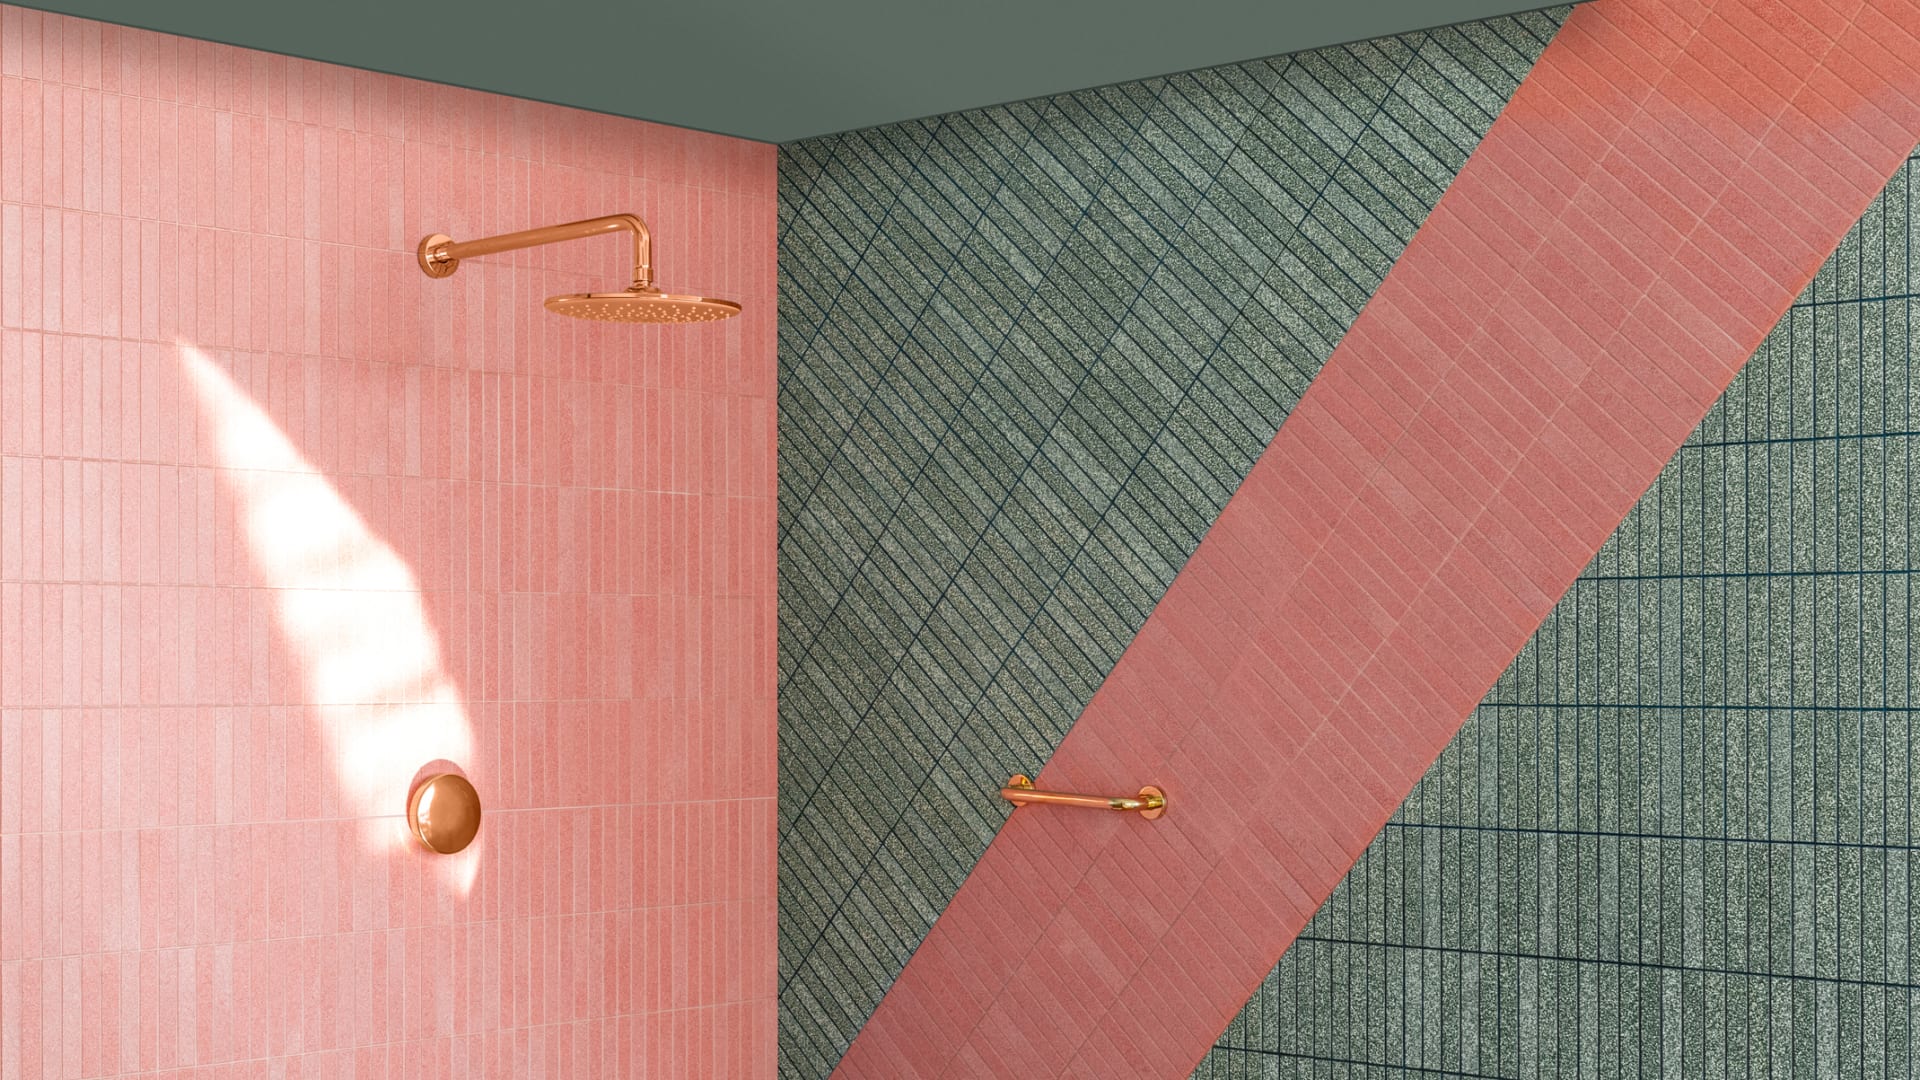 These gorgeous wall tiles are made from eggshells